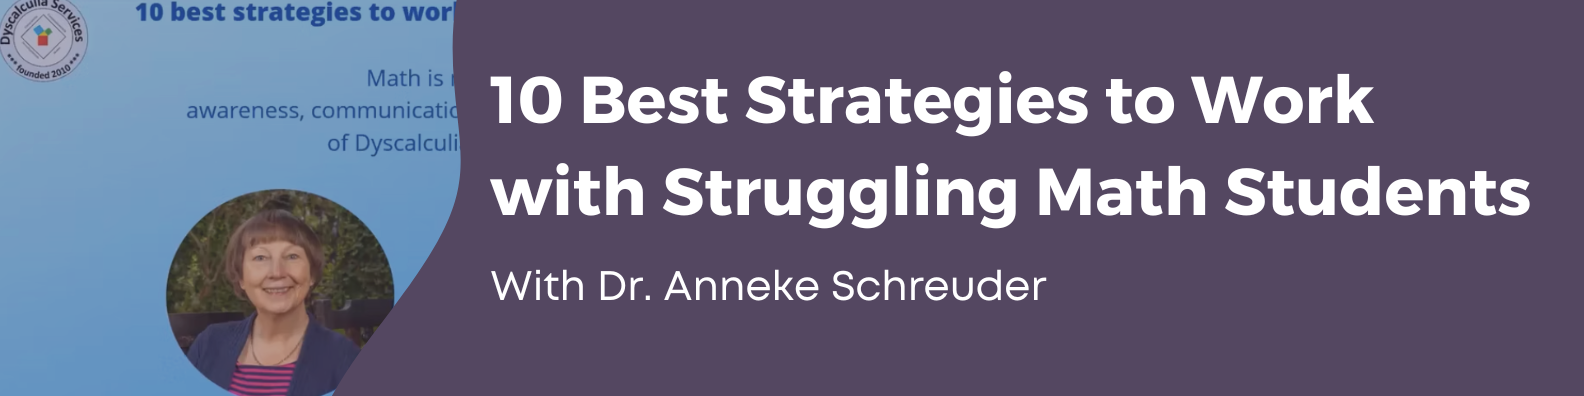 10 Best Strategies to Work with Struggling Math Students with Dr. Anneke Schreuder